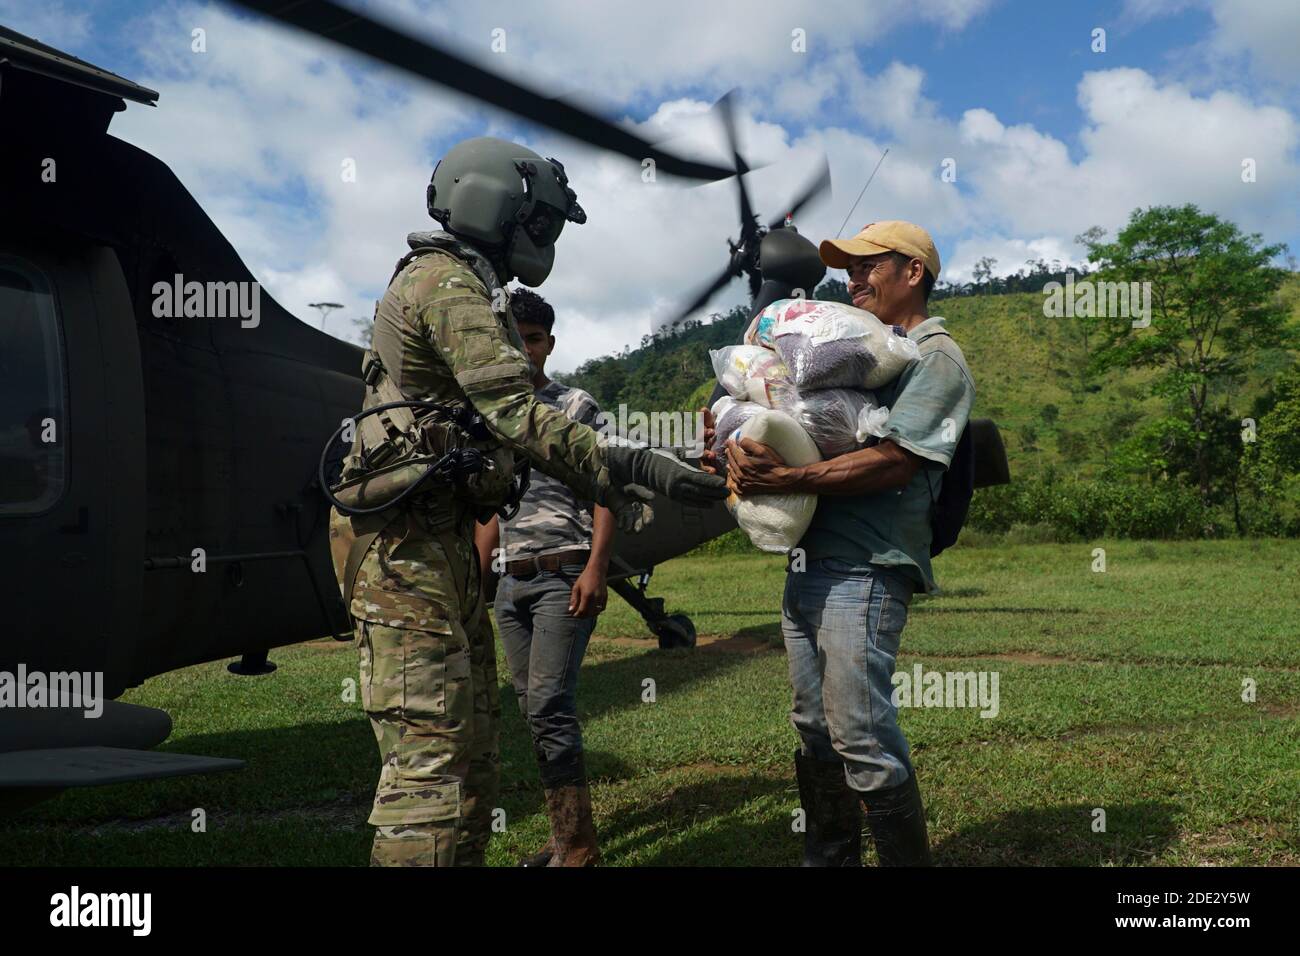 A U.S. soldier unloads humanitarian aid from a UH-60 Black Hawk helicopter to a resident stranded by Hurricane Iota November 27, 2020 in North Eastern, Honduras. Hurricane Iota swept through Central America destroying large sections of the coast and flooding roads. Stock Photo